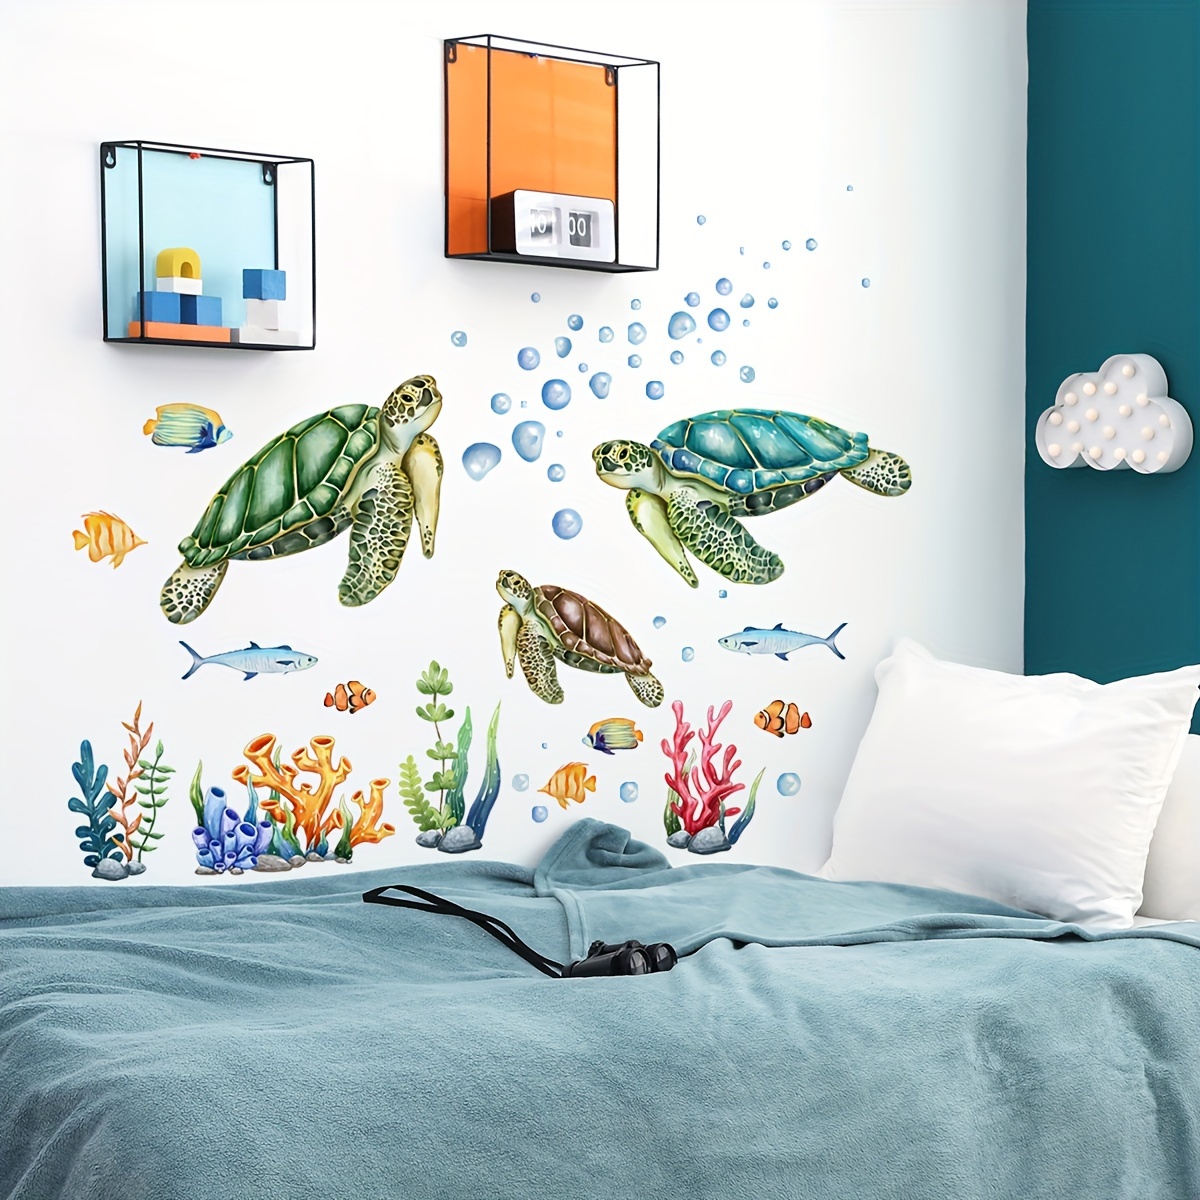 

Set Of 2 Creative Wall Sticker, Sea Turtle Coral Pattern Self-adhesive Wall Stickers, Bedroom Entryway Living Room Porch Home Decoration Wall Stickers, Removable Stickers, Wall Decor Decals